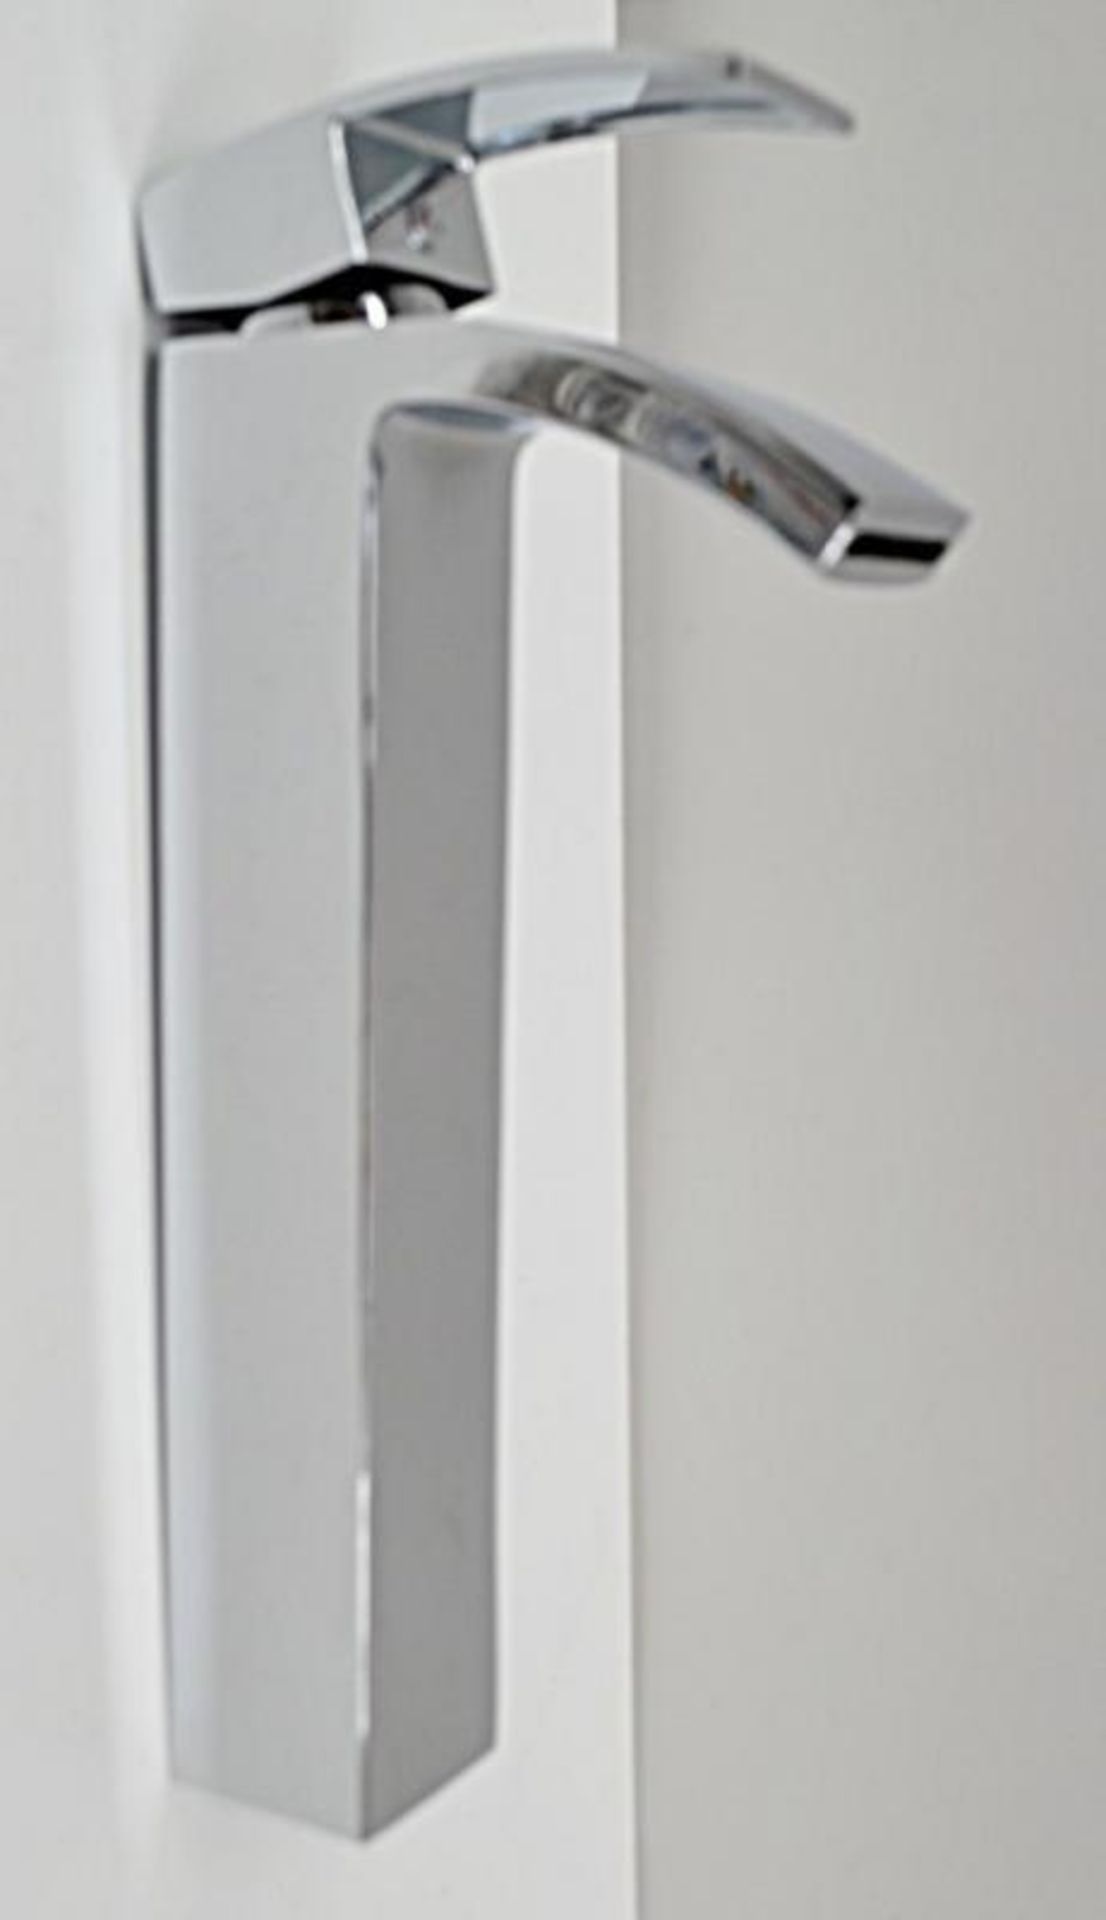 1 x CENTURY Basin Mixer Tap - Made From Solid Brass And Dipped In Chrome For A Seamless Finish - Ref - Image 2 of 5